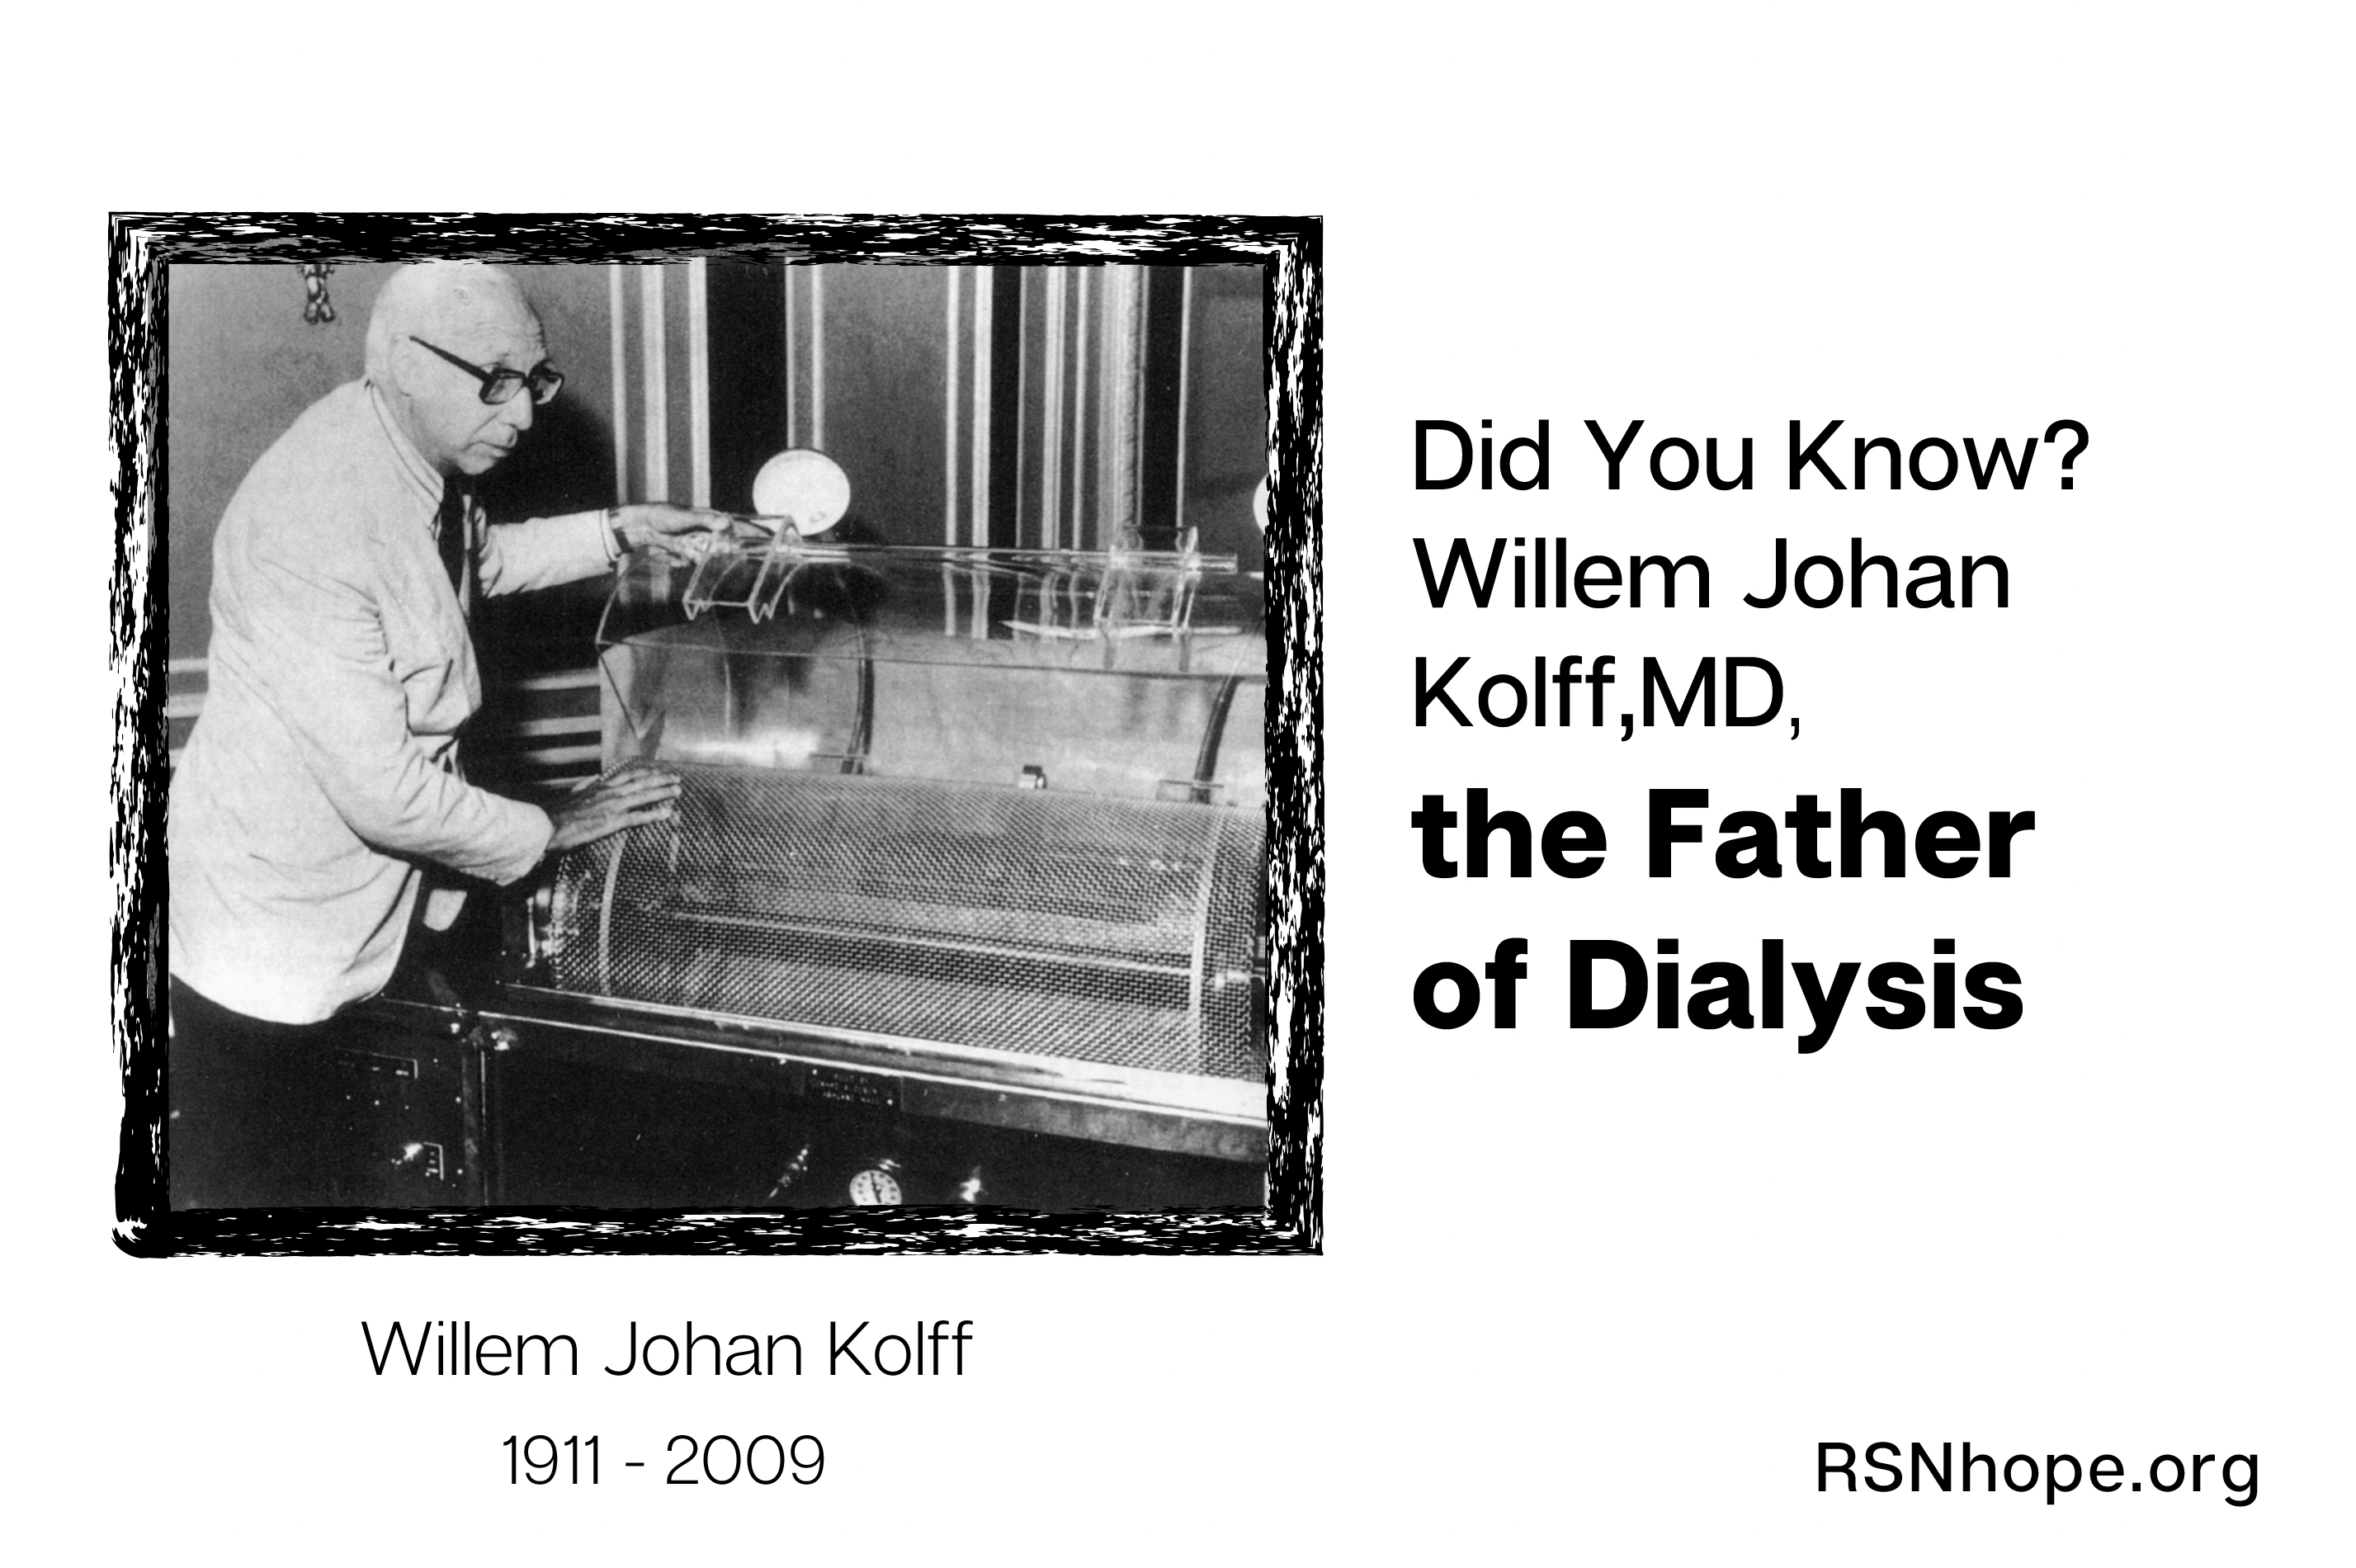 When Was Dialysis Invented?